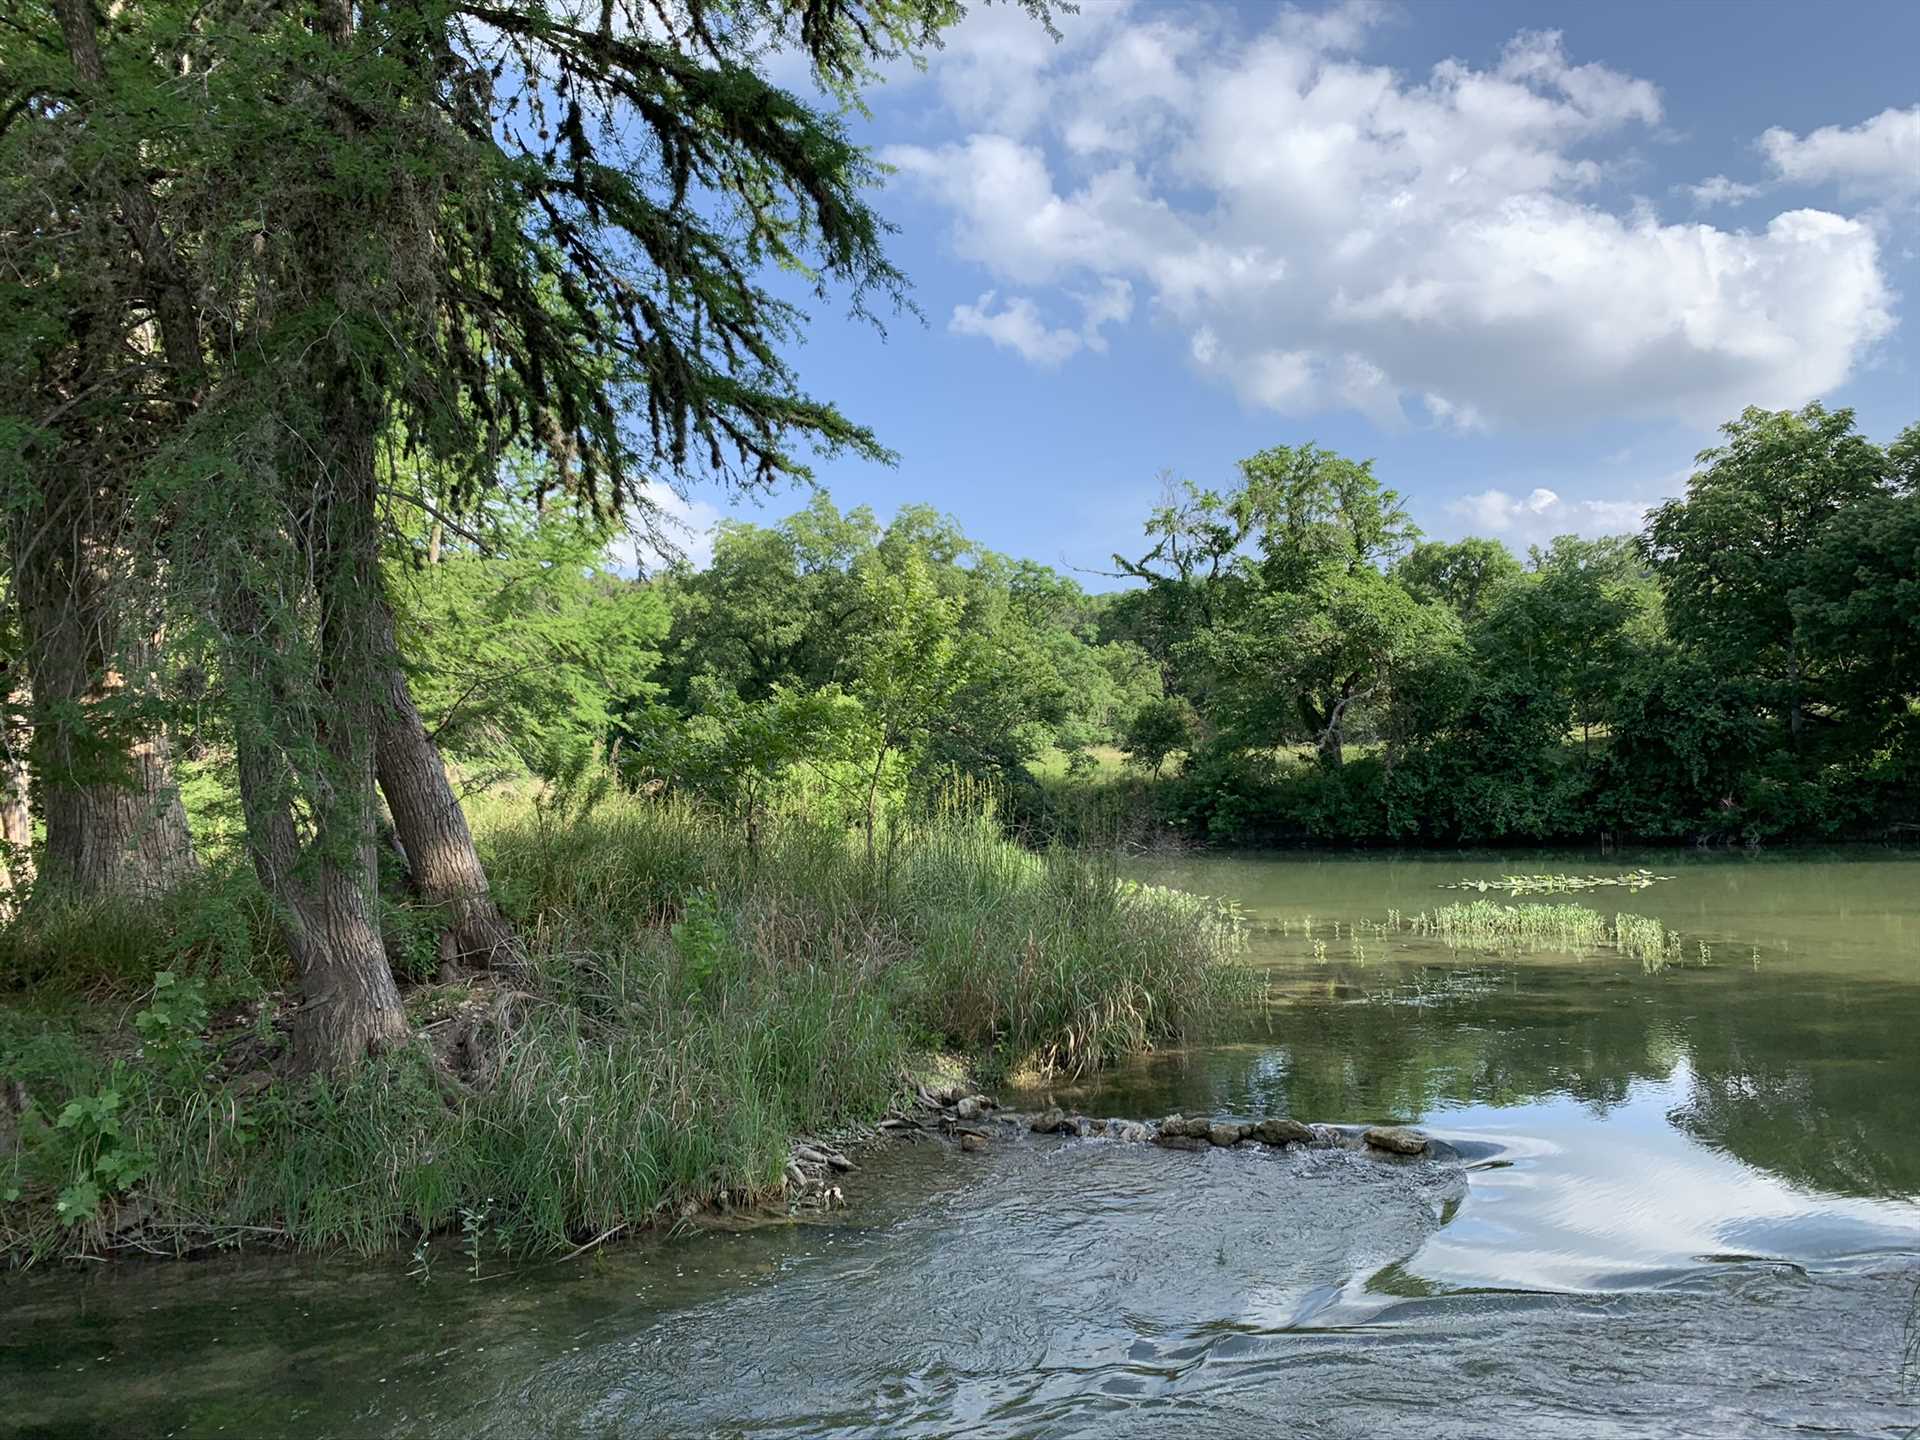                                                 Fish, swim, and tube the big and beautiful Guadalupe, or simply find a shady spot to relax.